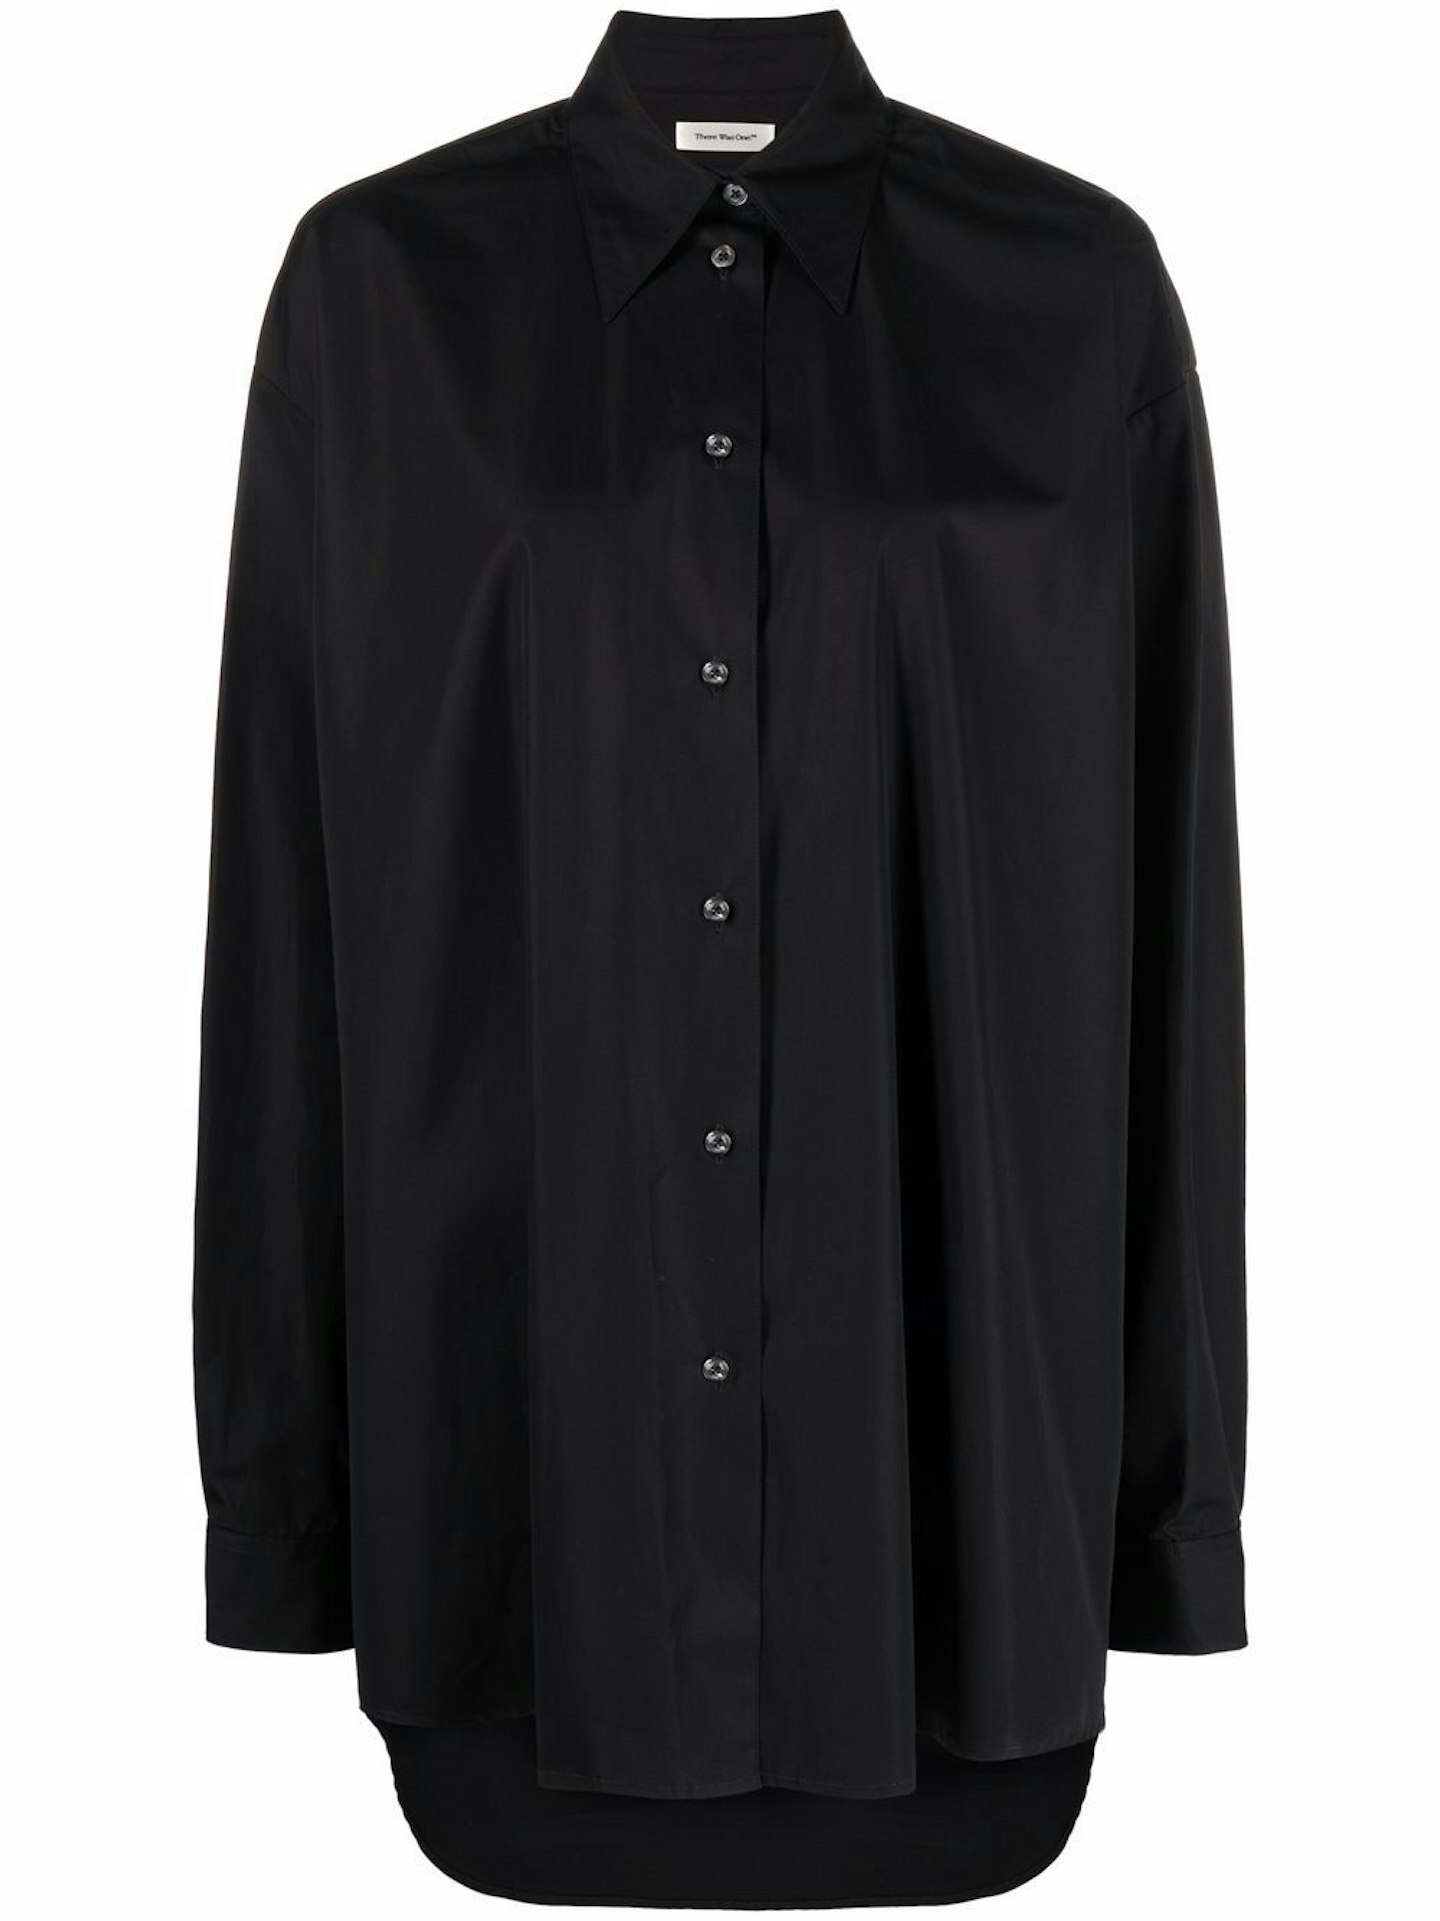 Lunchtime Shop Wednesday - There Was One, Oversize-Fit Cotton Shirt, £230